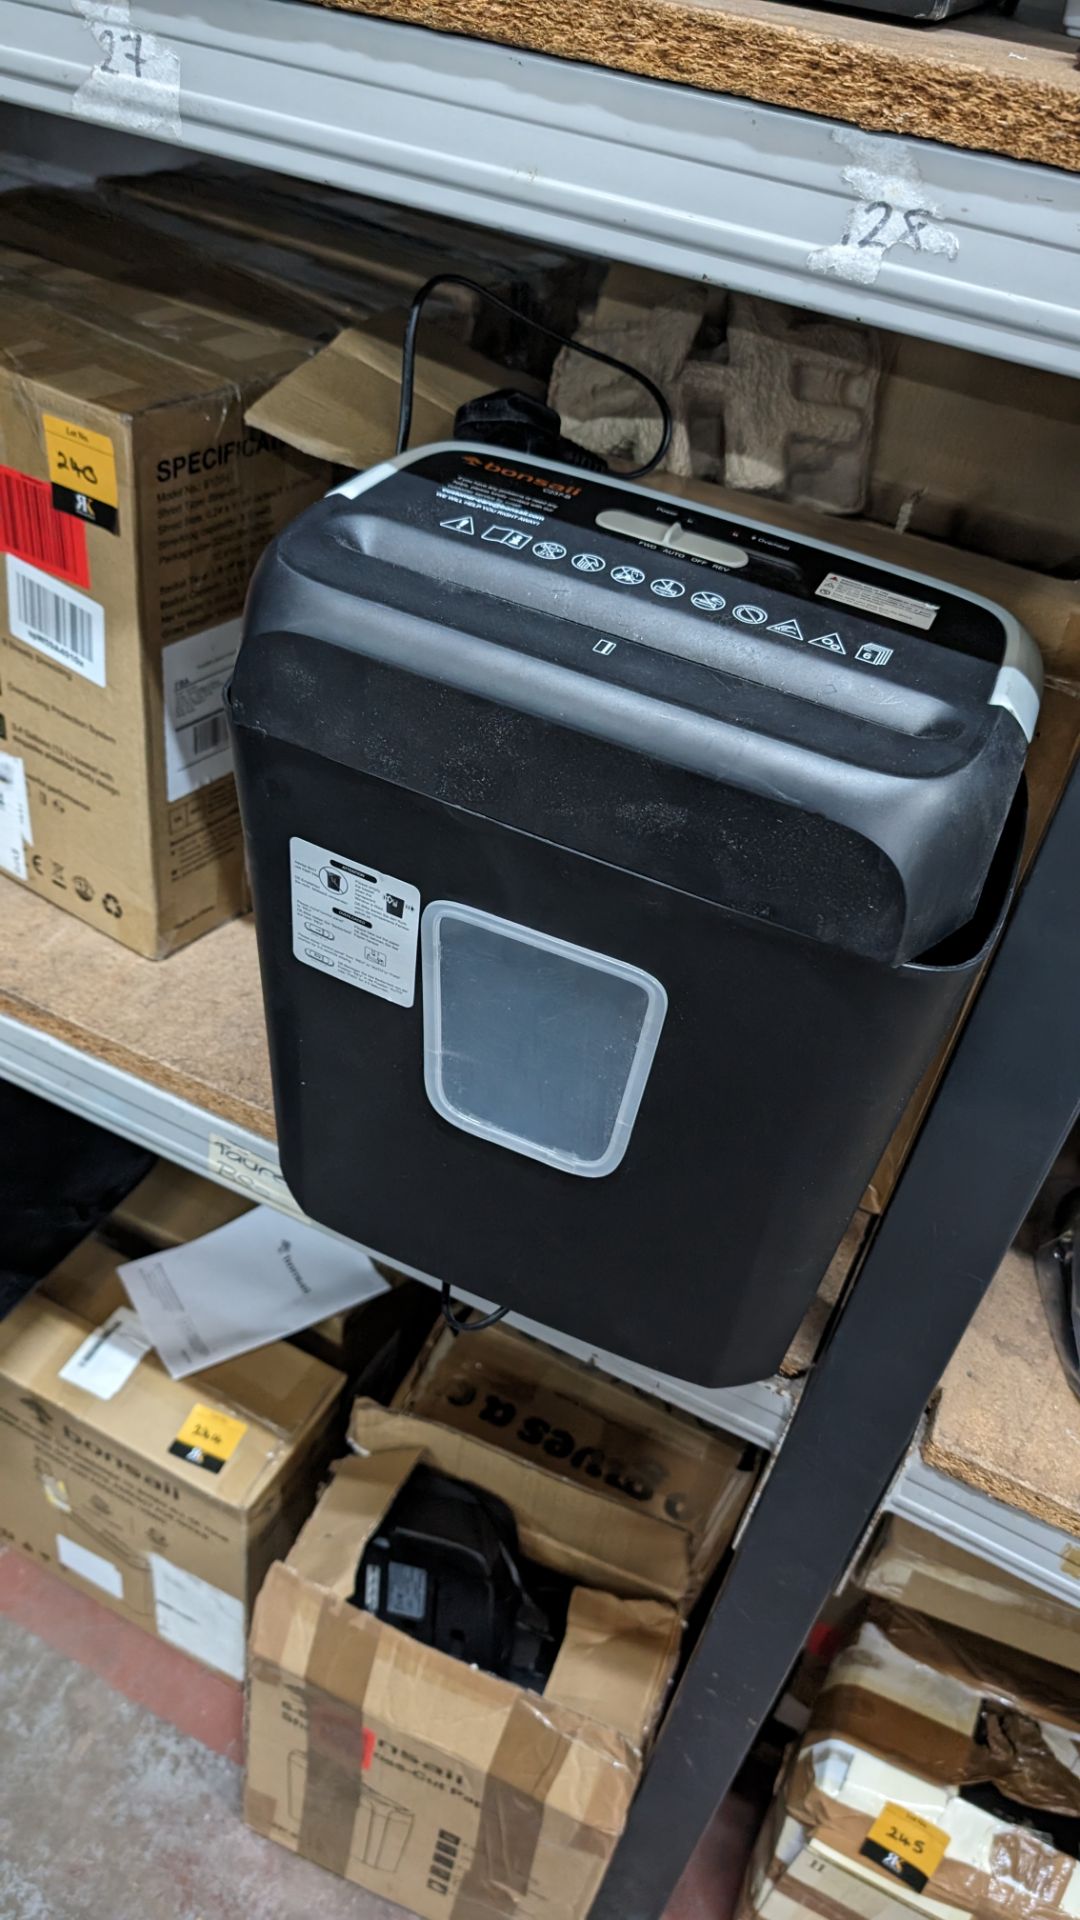 6 off paper shredders - these units appear new but we cannot be certain - Image 4 of 5